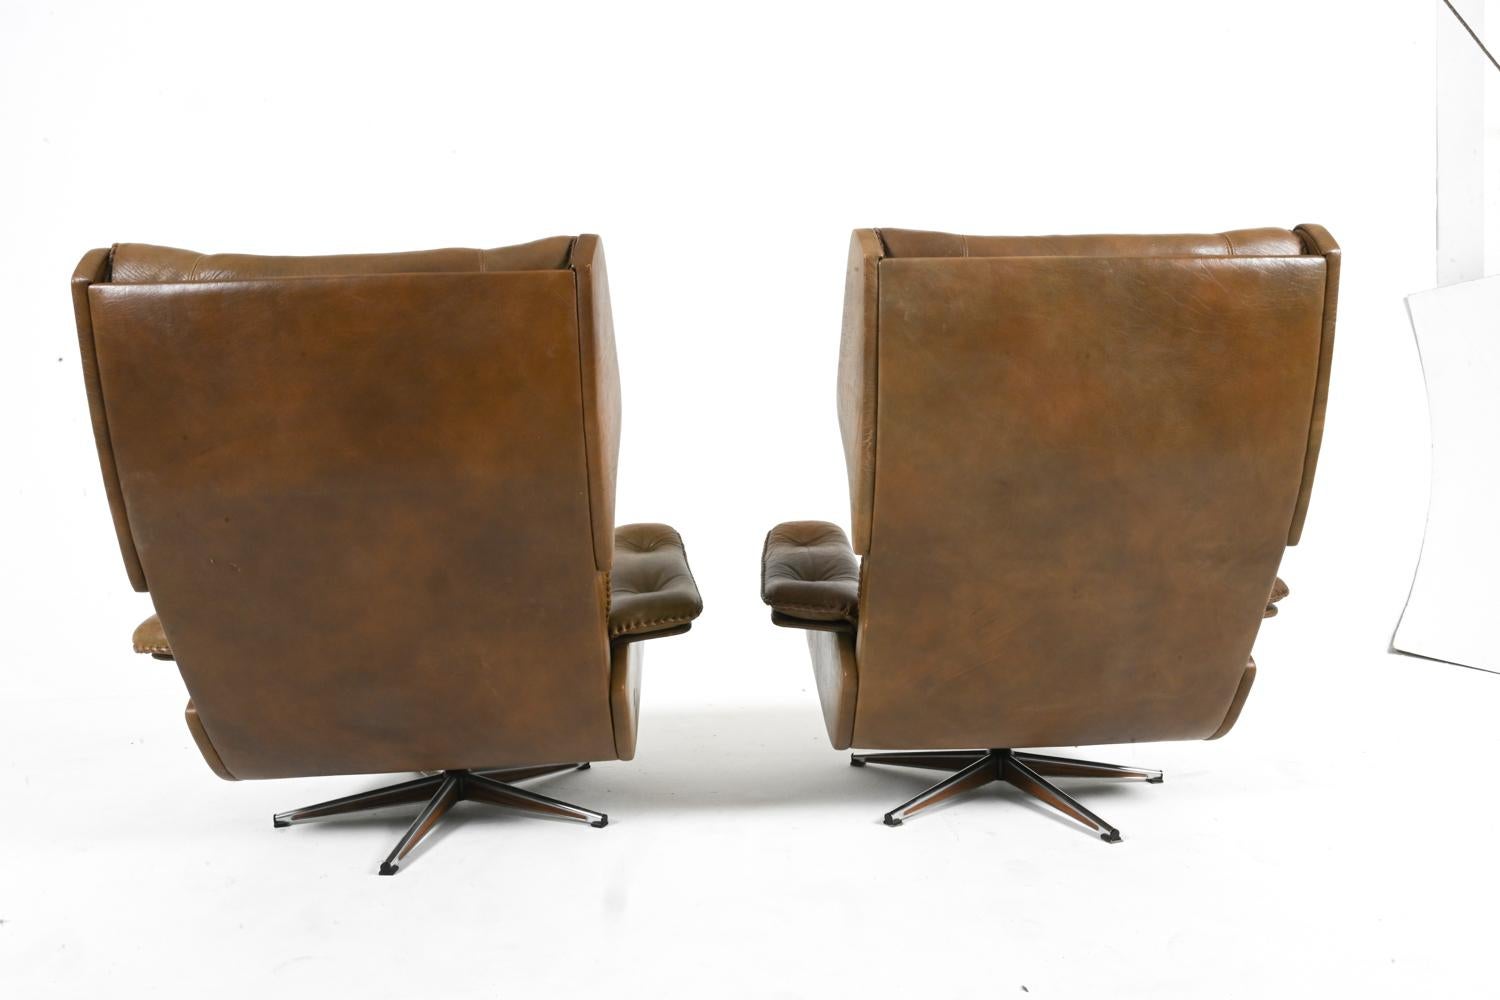 Pair of Buffalo Leather Swivel Chairs By Arne Norell, Swedish 1960's For Sale 3